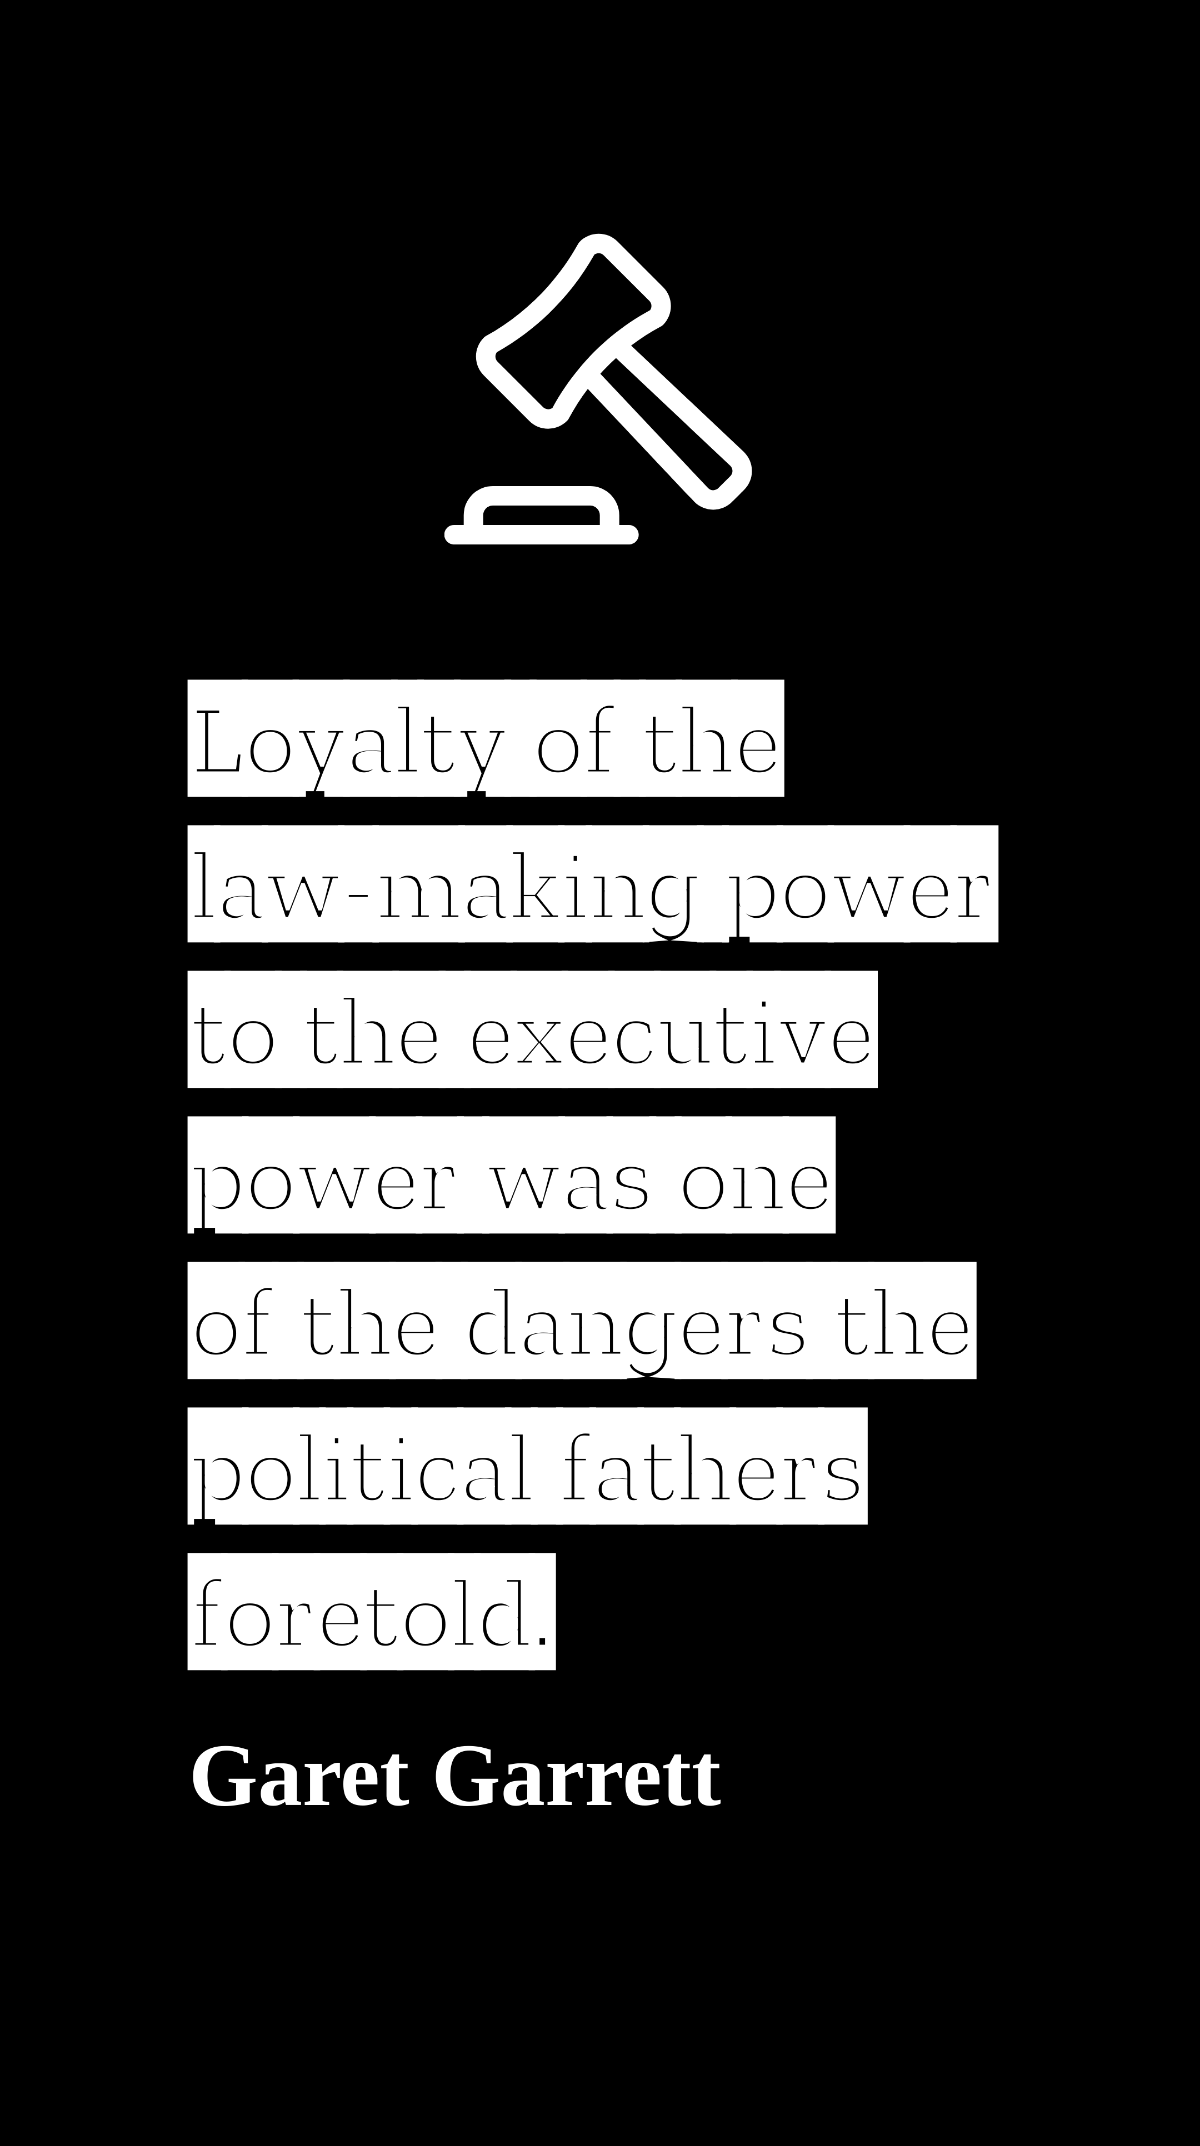 Free Garet Garrett - Loyalty of the law-making power to the executive power was one of the dangers the political fathers foretold. Template